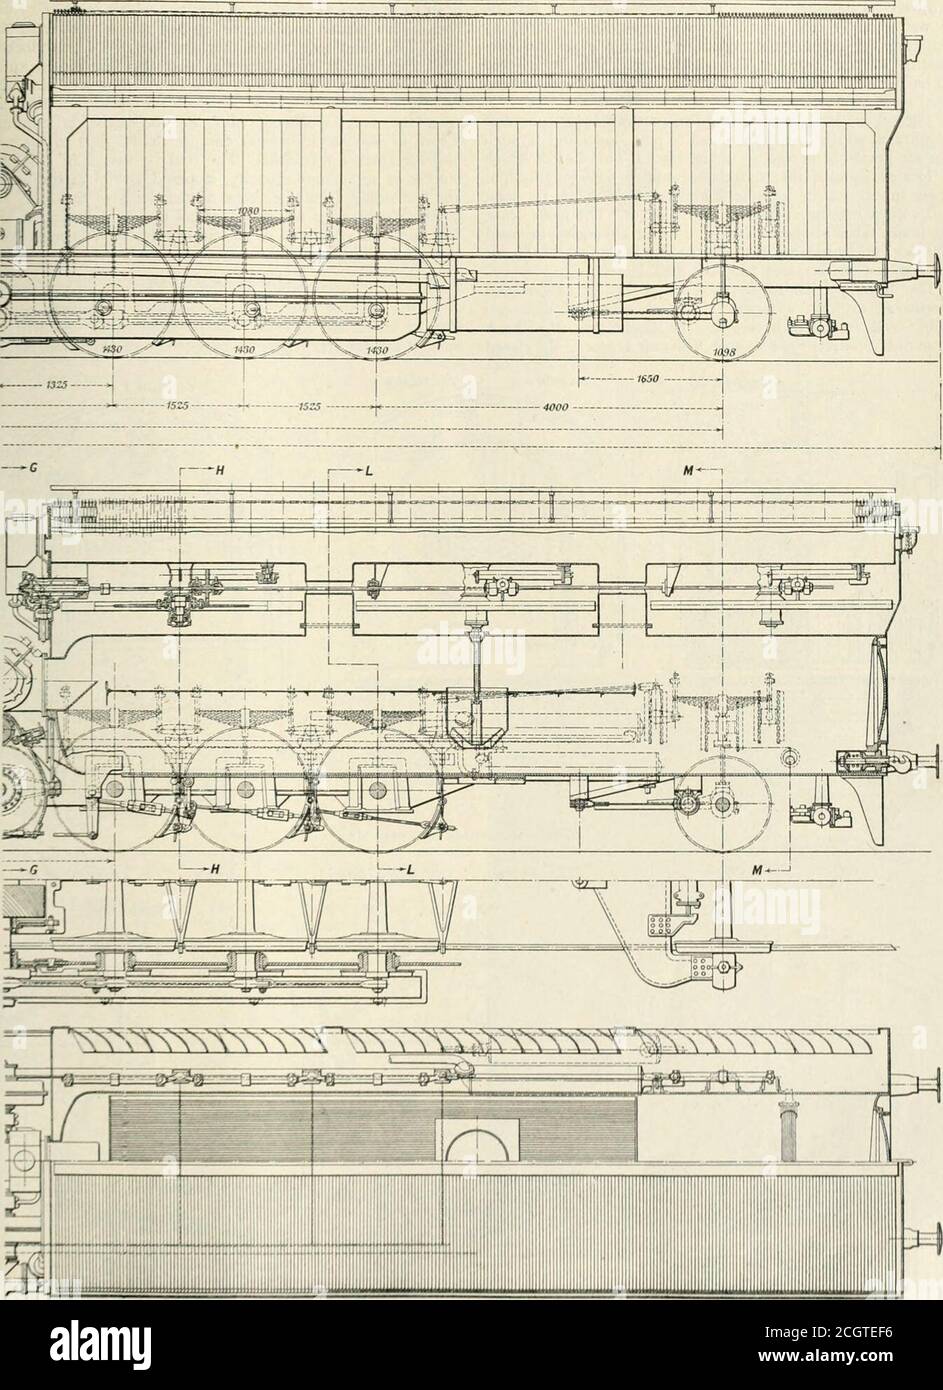 . Railway mechanical engineer . Elevation, Sections and Plan of October, 1^22 RAILWAY MECHANICAL ENGINEER 559. LJung»tronn Turblne-Drlven Locomotlva 560 RAILWAY MECHANICAL ENGINEER Vol. 96, No. iO The length of the tubes is only about twothirds that ofordinary locomotive boilers. This was decided upon becauseit was thought that greater economy could be secured byutilizing the surplus heat contained in the gases for pre-heating the air required for combustion. This is believedto be the first instance in which an air preheater has beenused on a locomotive. The smokebo-x is divided into two porti Stock Photo